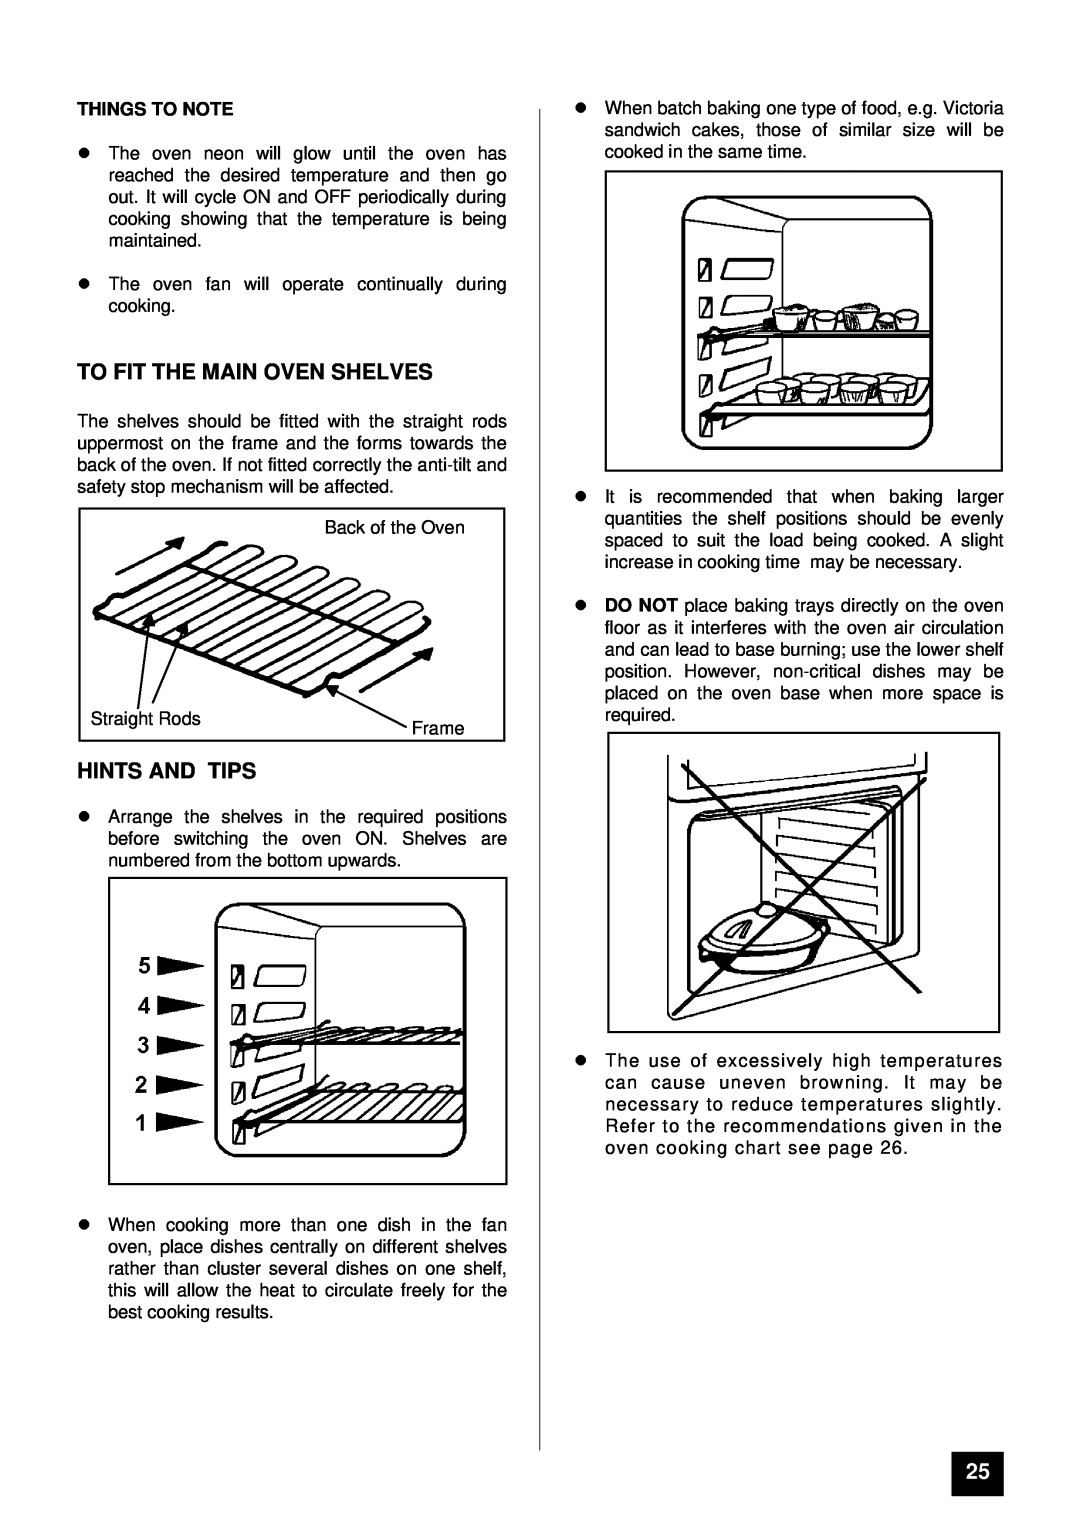 Tricity Bendix BS 613/2 installation instructions To Fit The Main Oven Shelves, lHINTS AND TIPS, Things To Note 